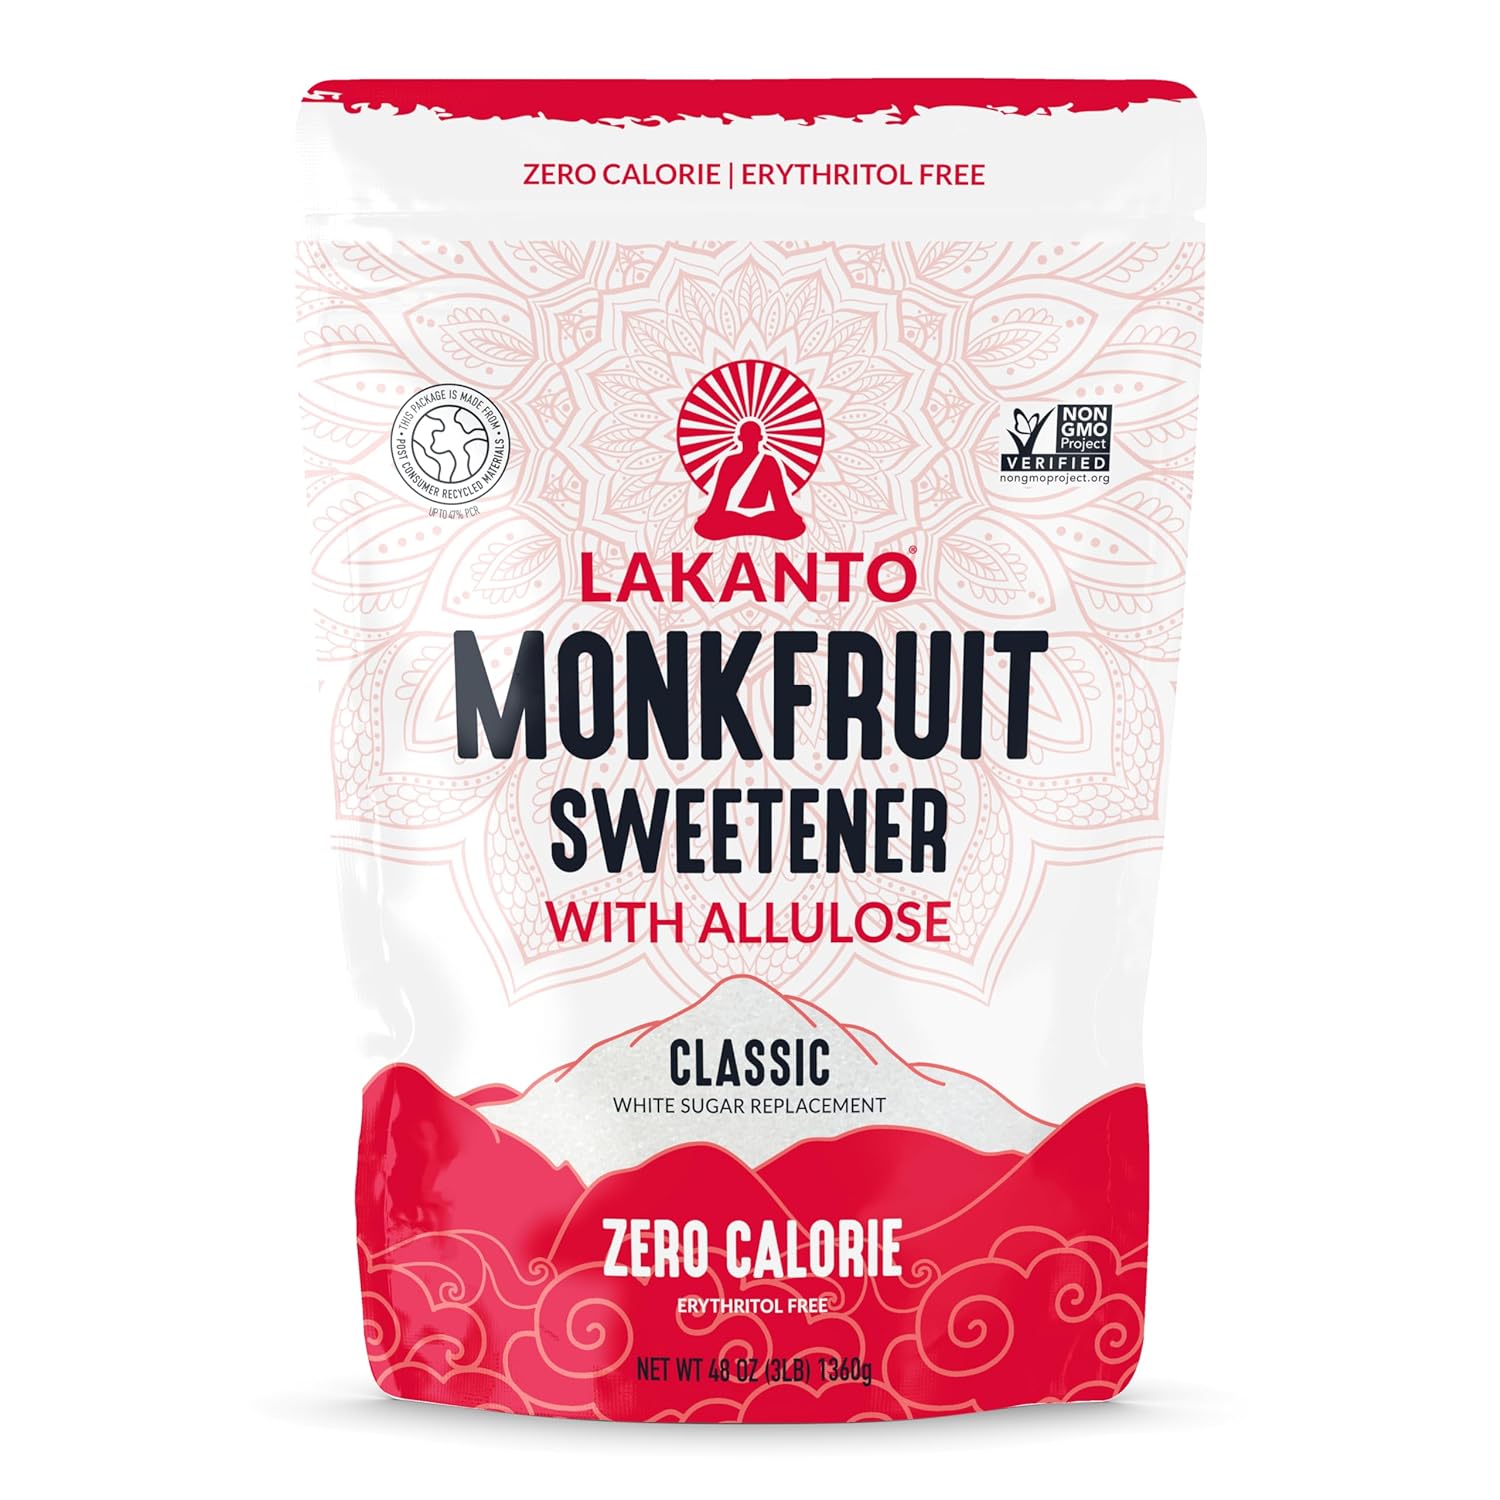 Lakanto Classic Monk Fruit Sweetener with Allulose - White Sugar Substitute, Erythritol Free, Gluten Free, Vegan, Keto Friendly, Sugar Replacement (Classic White - 3 lb - Pack of 1)